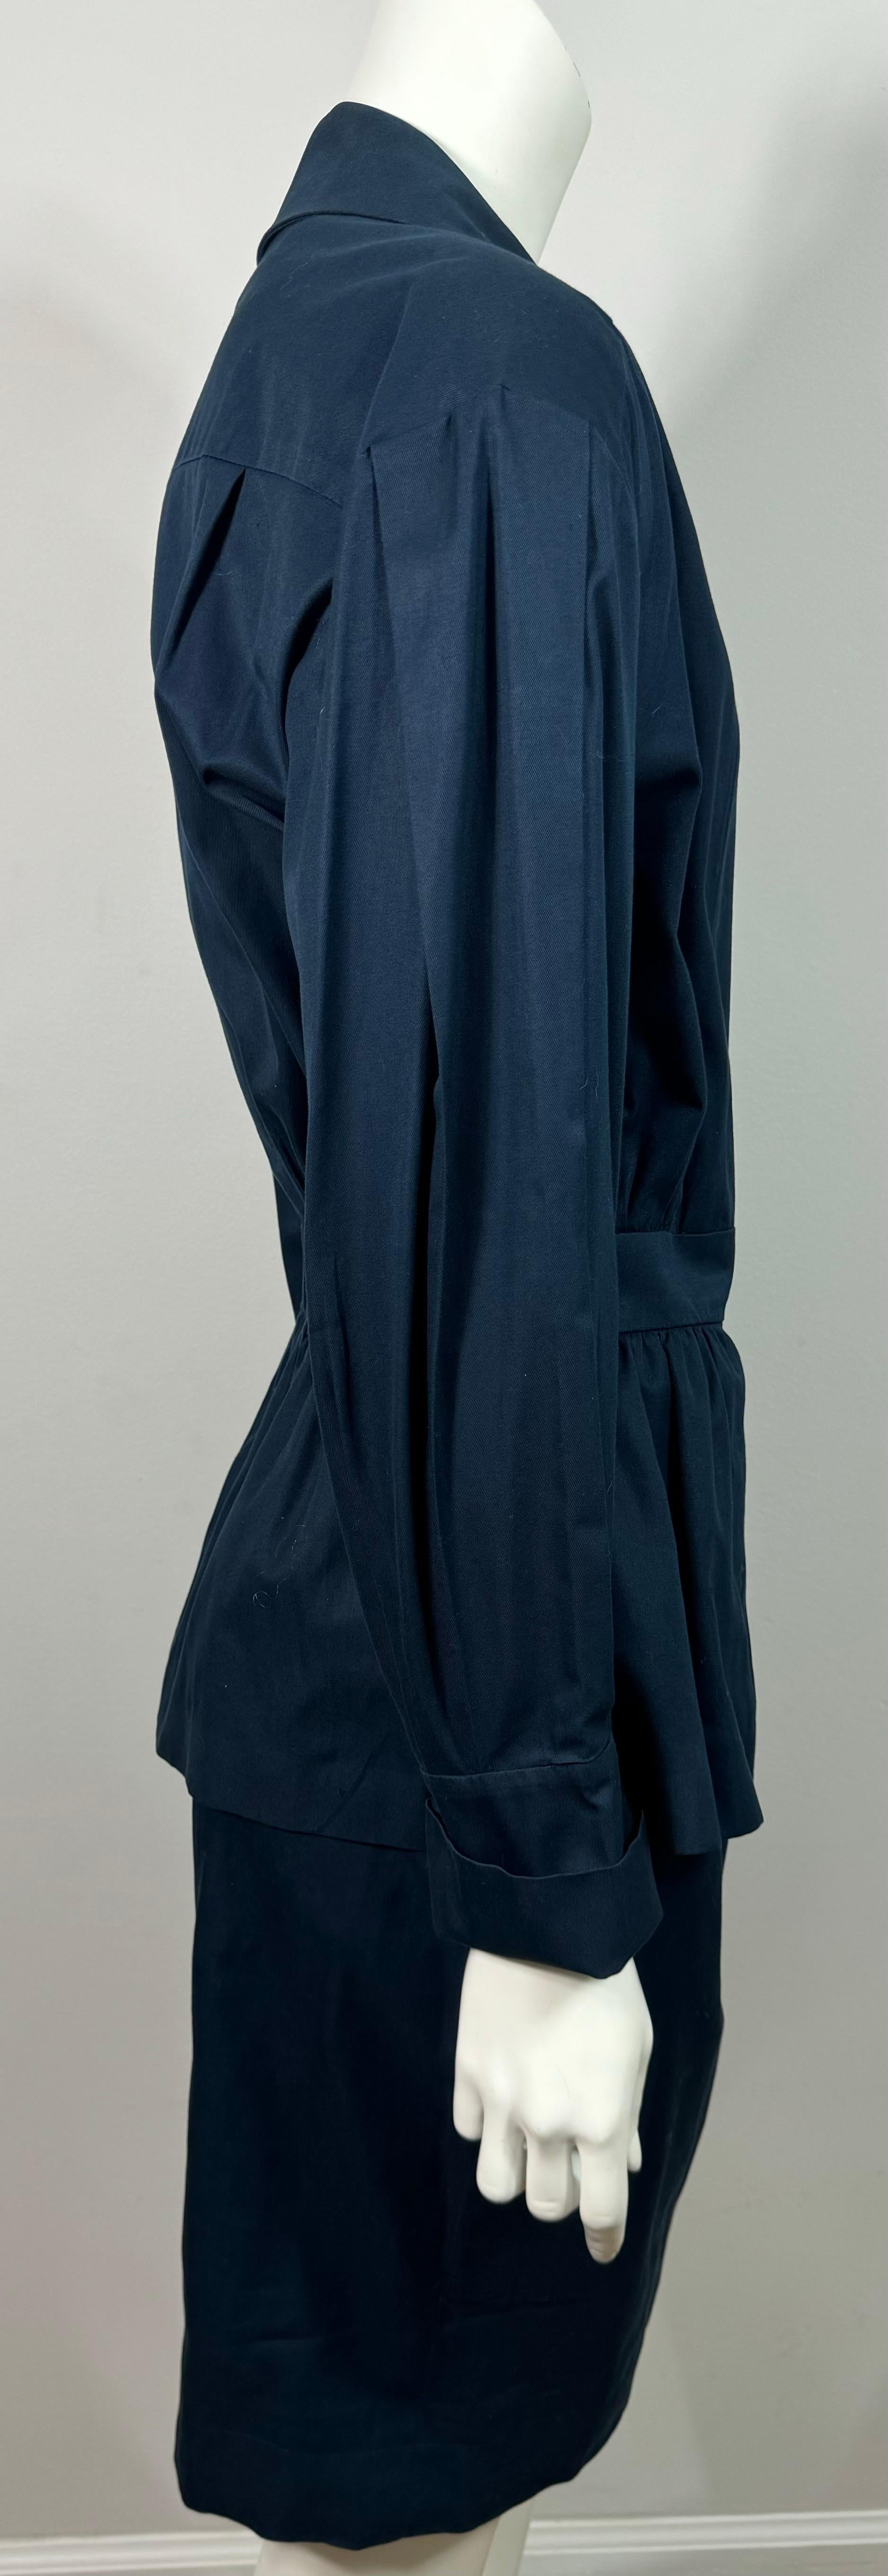 Chanel 1980's Navy Cotton Cinched Waist Jacket Skirt Suit - Size 38 For Sale 7